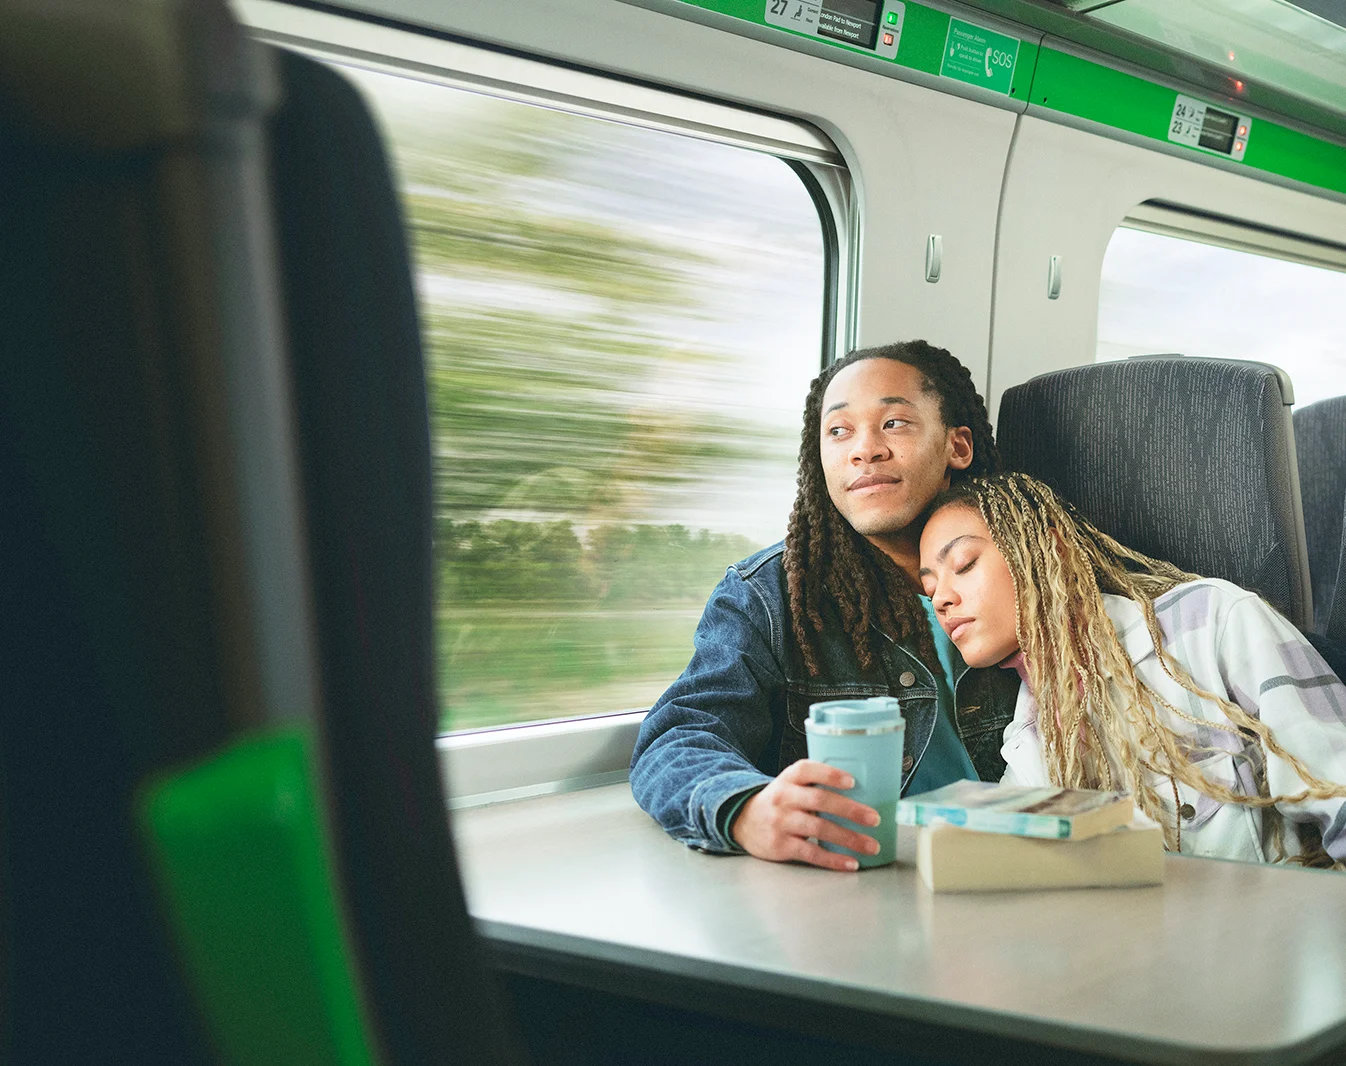 A Black man and Black woman sitting next to each other on a train, he is looking out the window and holding a travel mug while she leans on his shoulder with her eyes closed. 